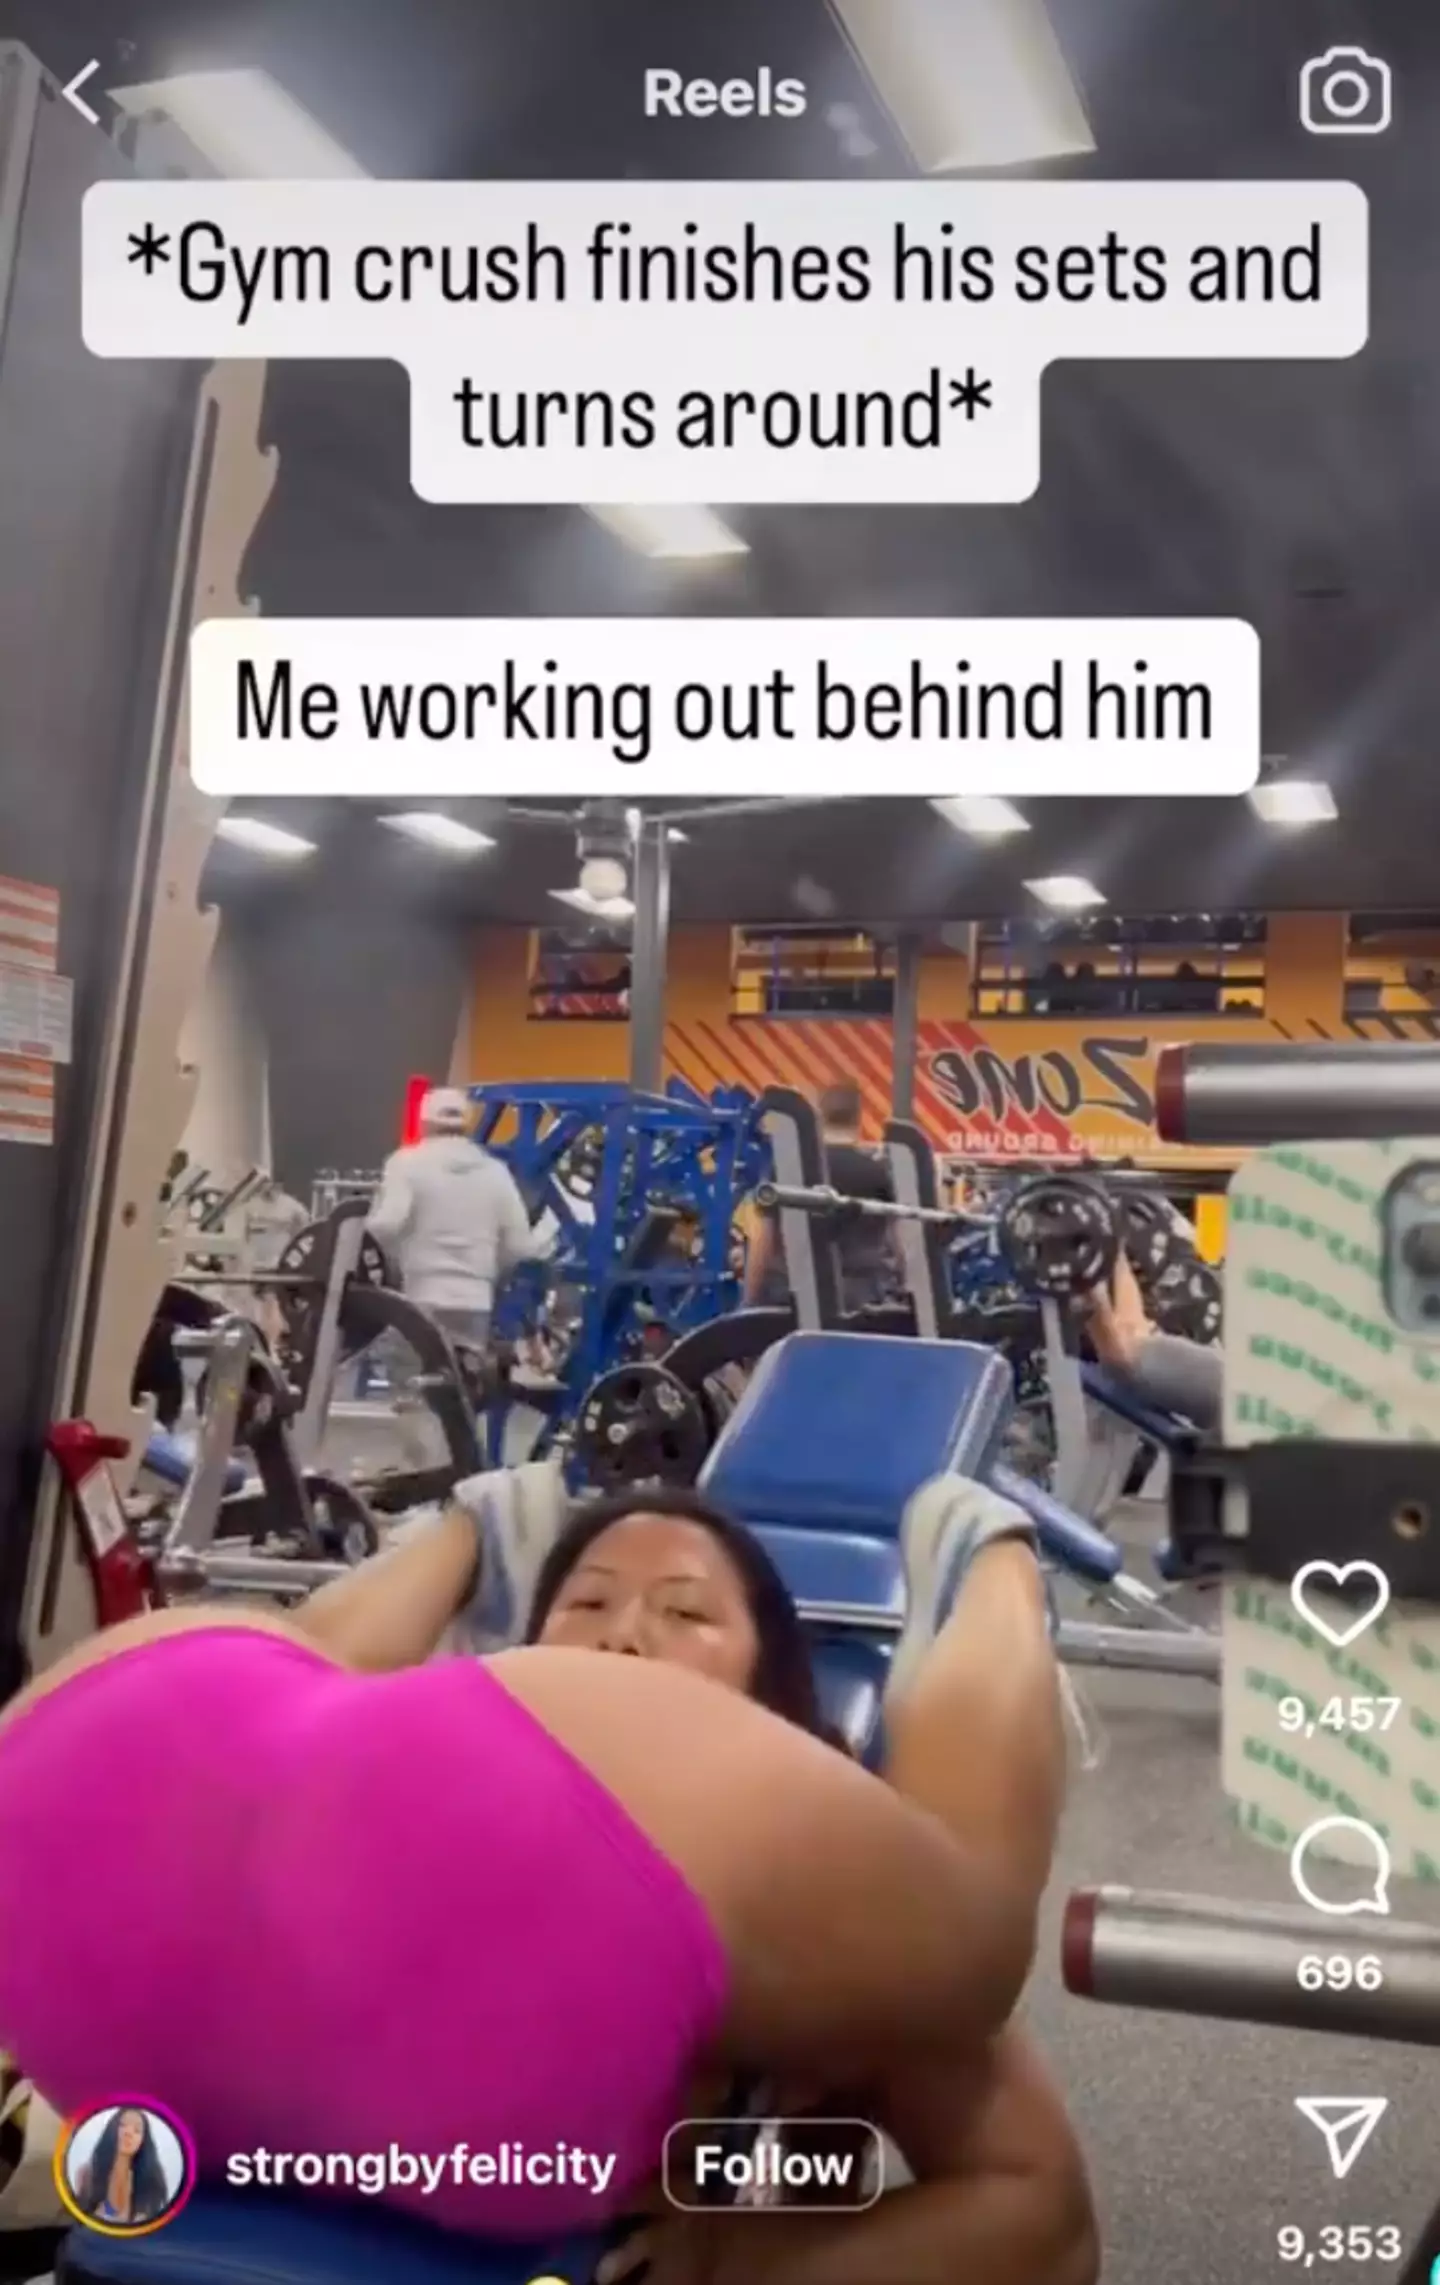 Joey Swoll called out this woman for her 'inappropriate' exercise.